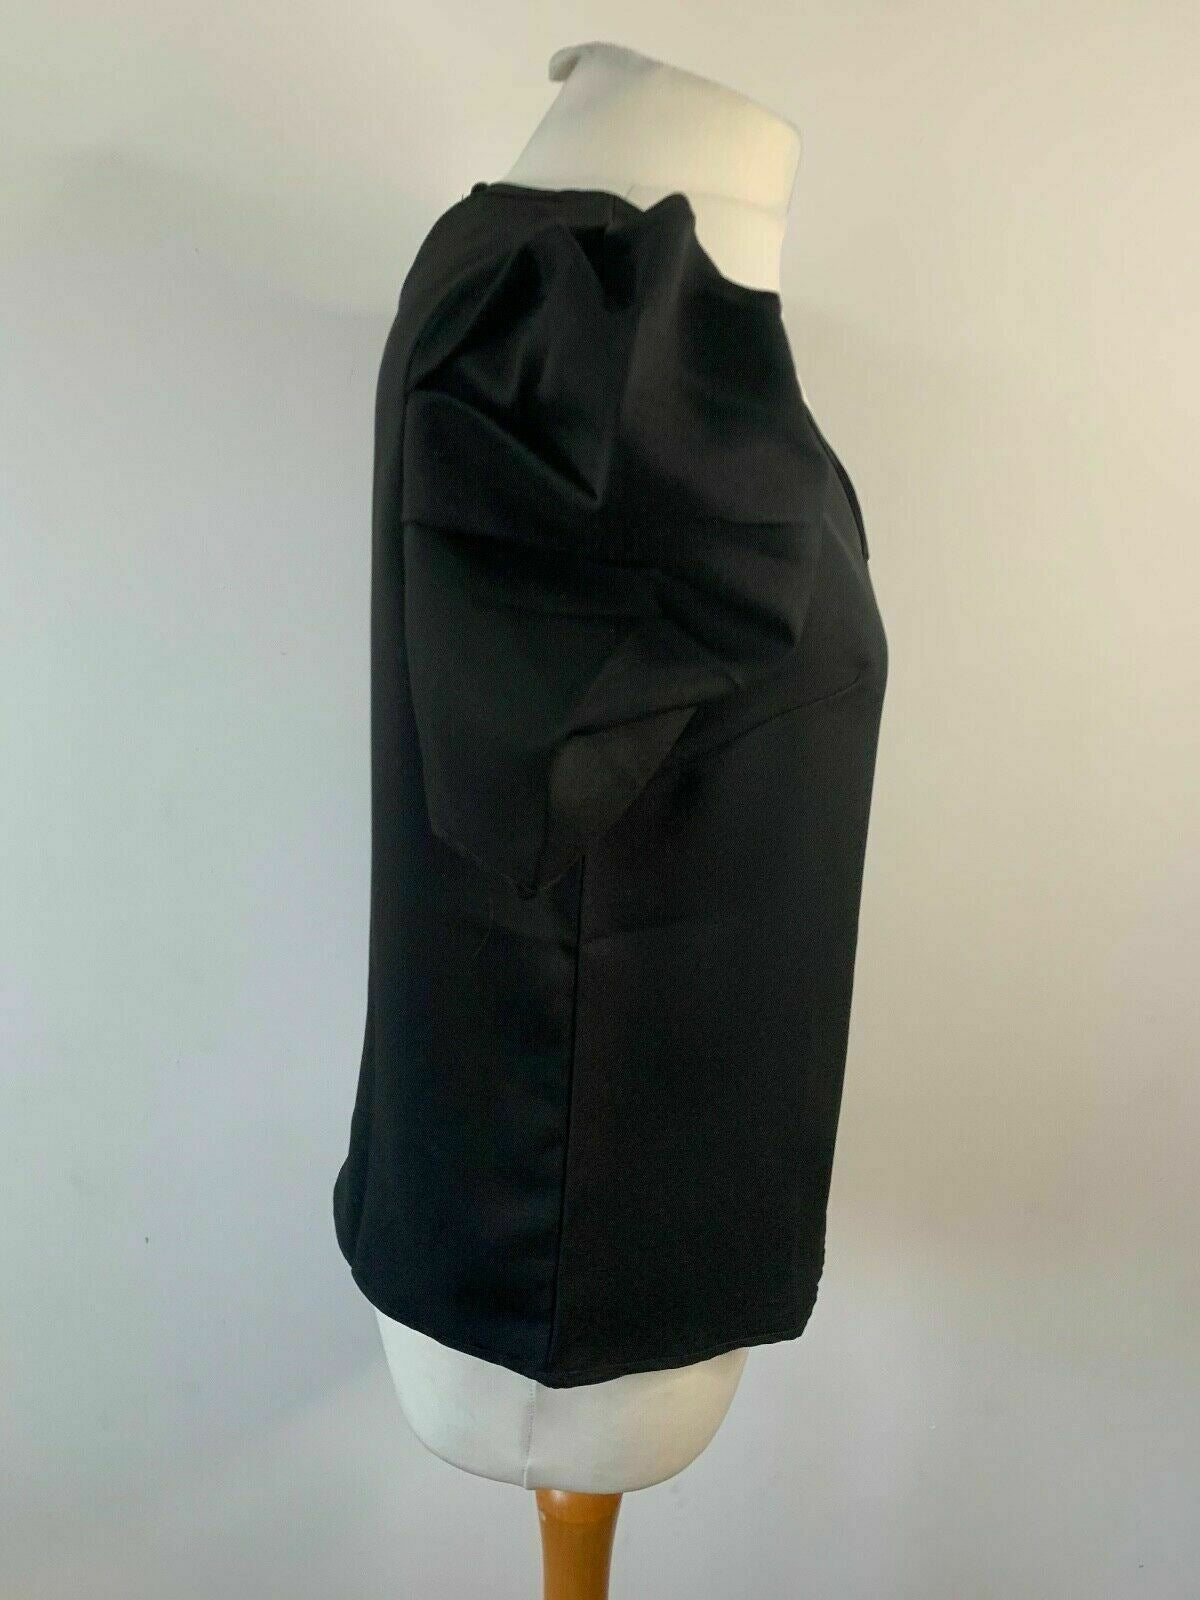 SHEIN Black Blouse Puffed Sleeves Size S 8